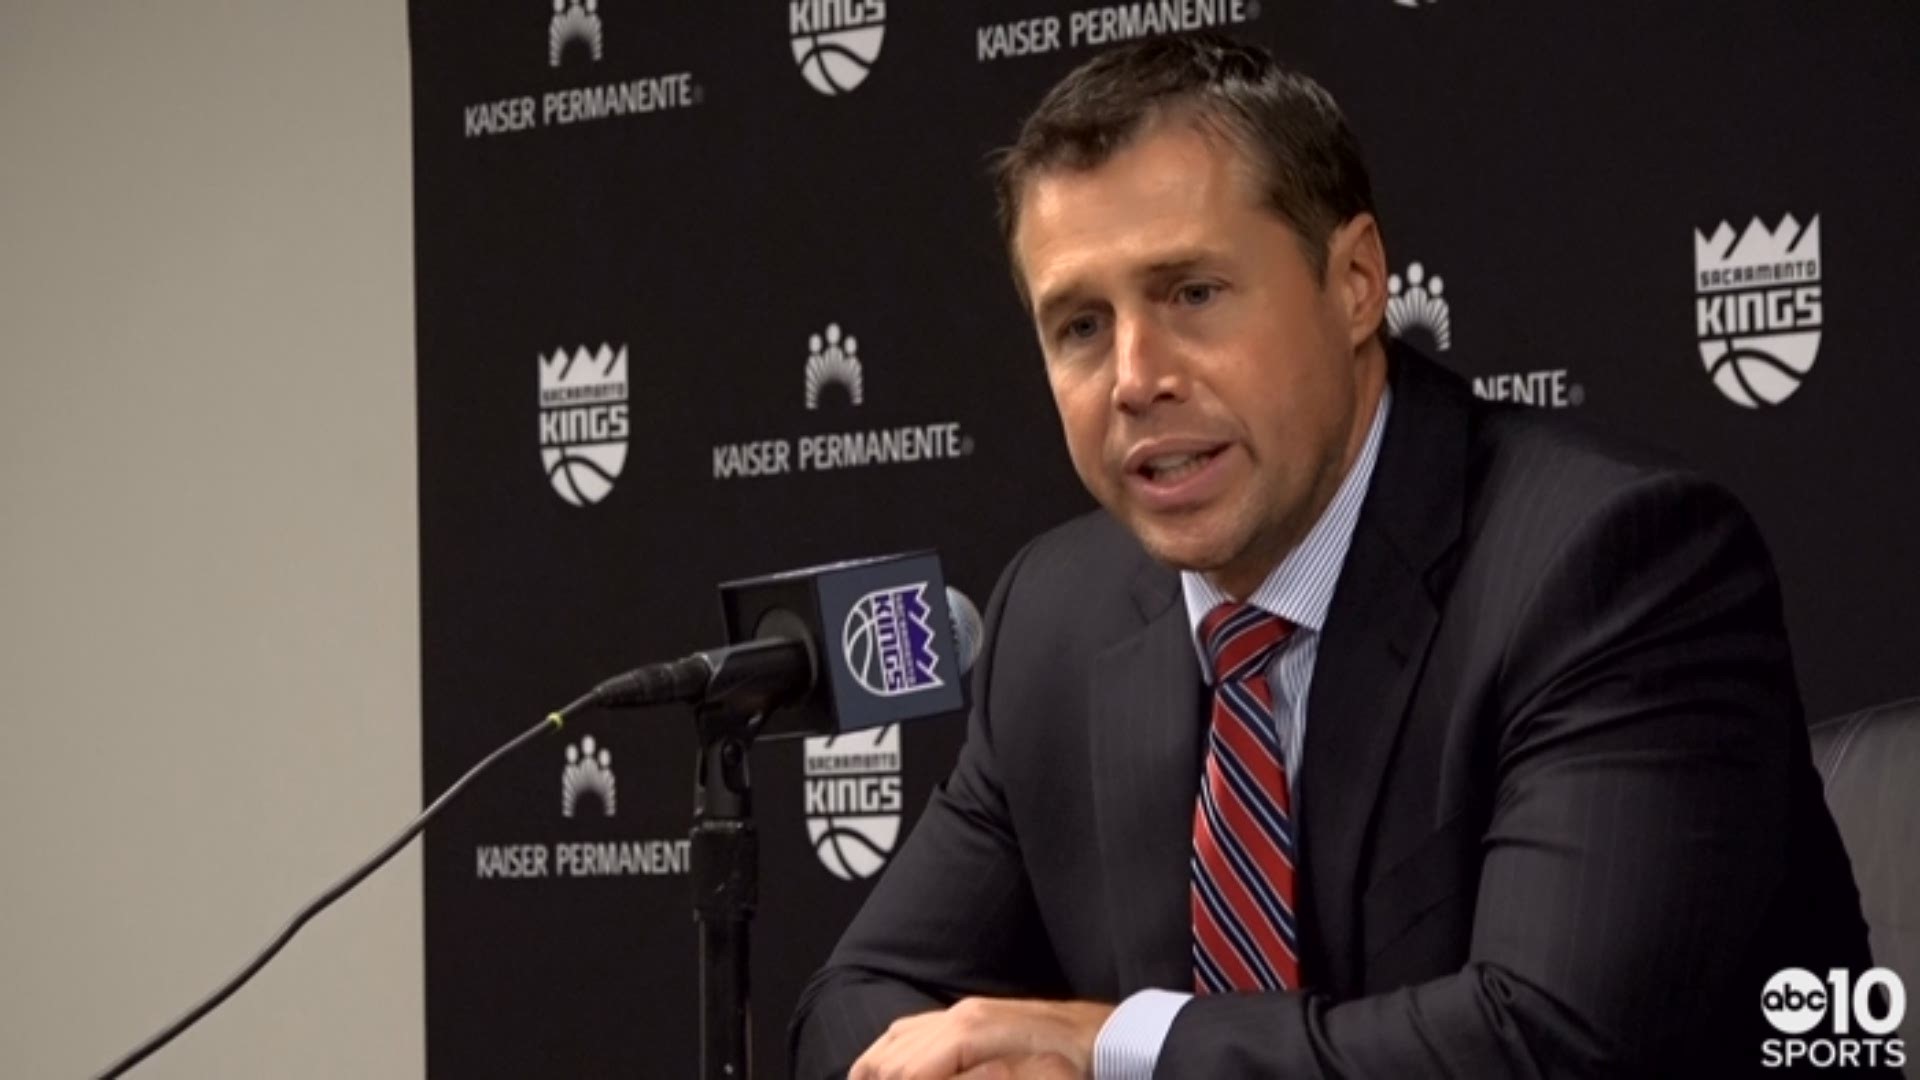 Sacramento Kings head coach Dave Joerger talks about his team's loss to the Toronto Raptors on Wednesday night and his team being held to under 30 points in each quarter.